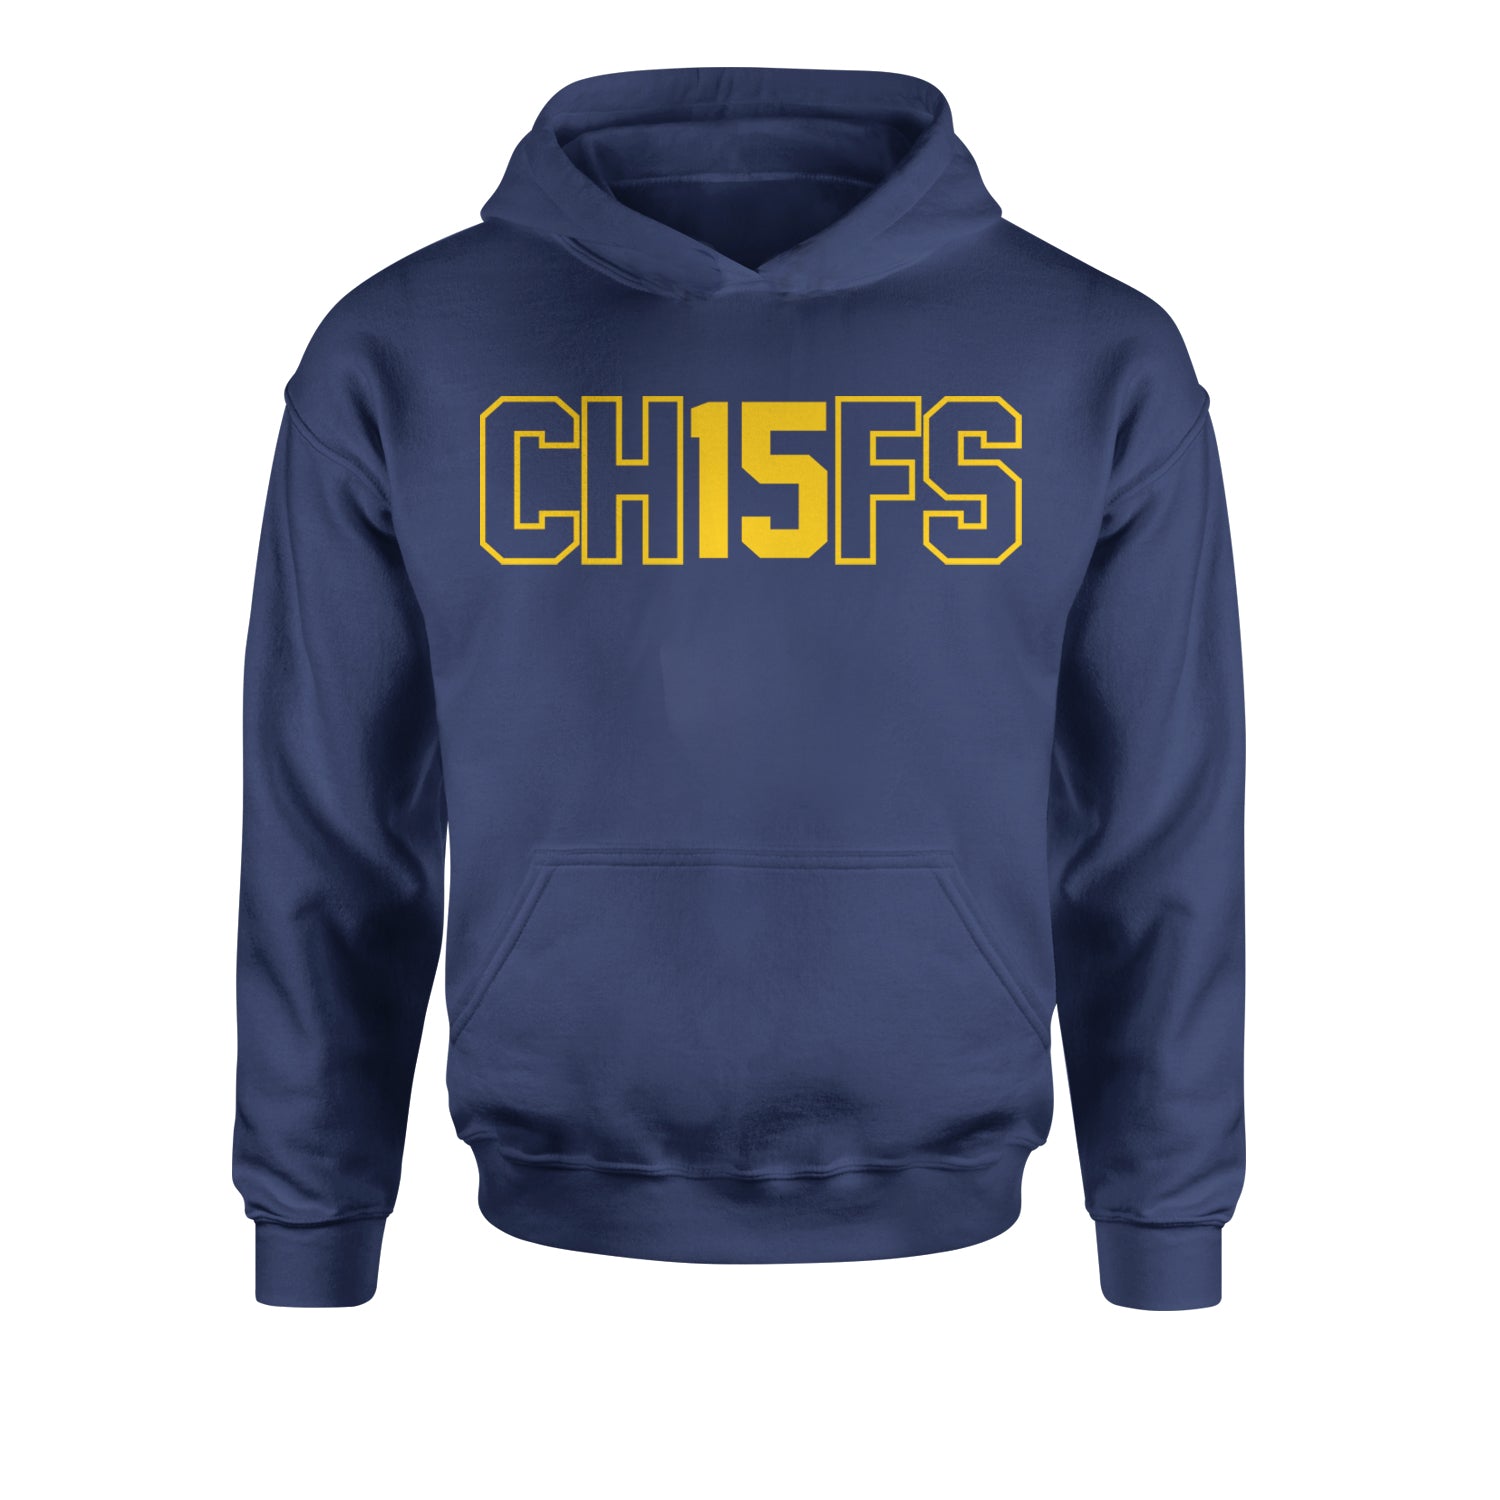 Ch15fs Chief 15 Shirt Youth-Sized Hoodie ass, big, burrowhead, game, kelce, know, moutha, my, nd, patrick, role, shut, sports, your by Expression Tees